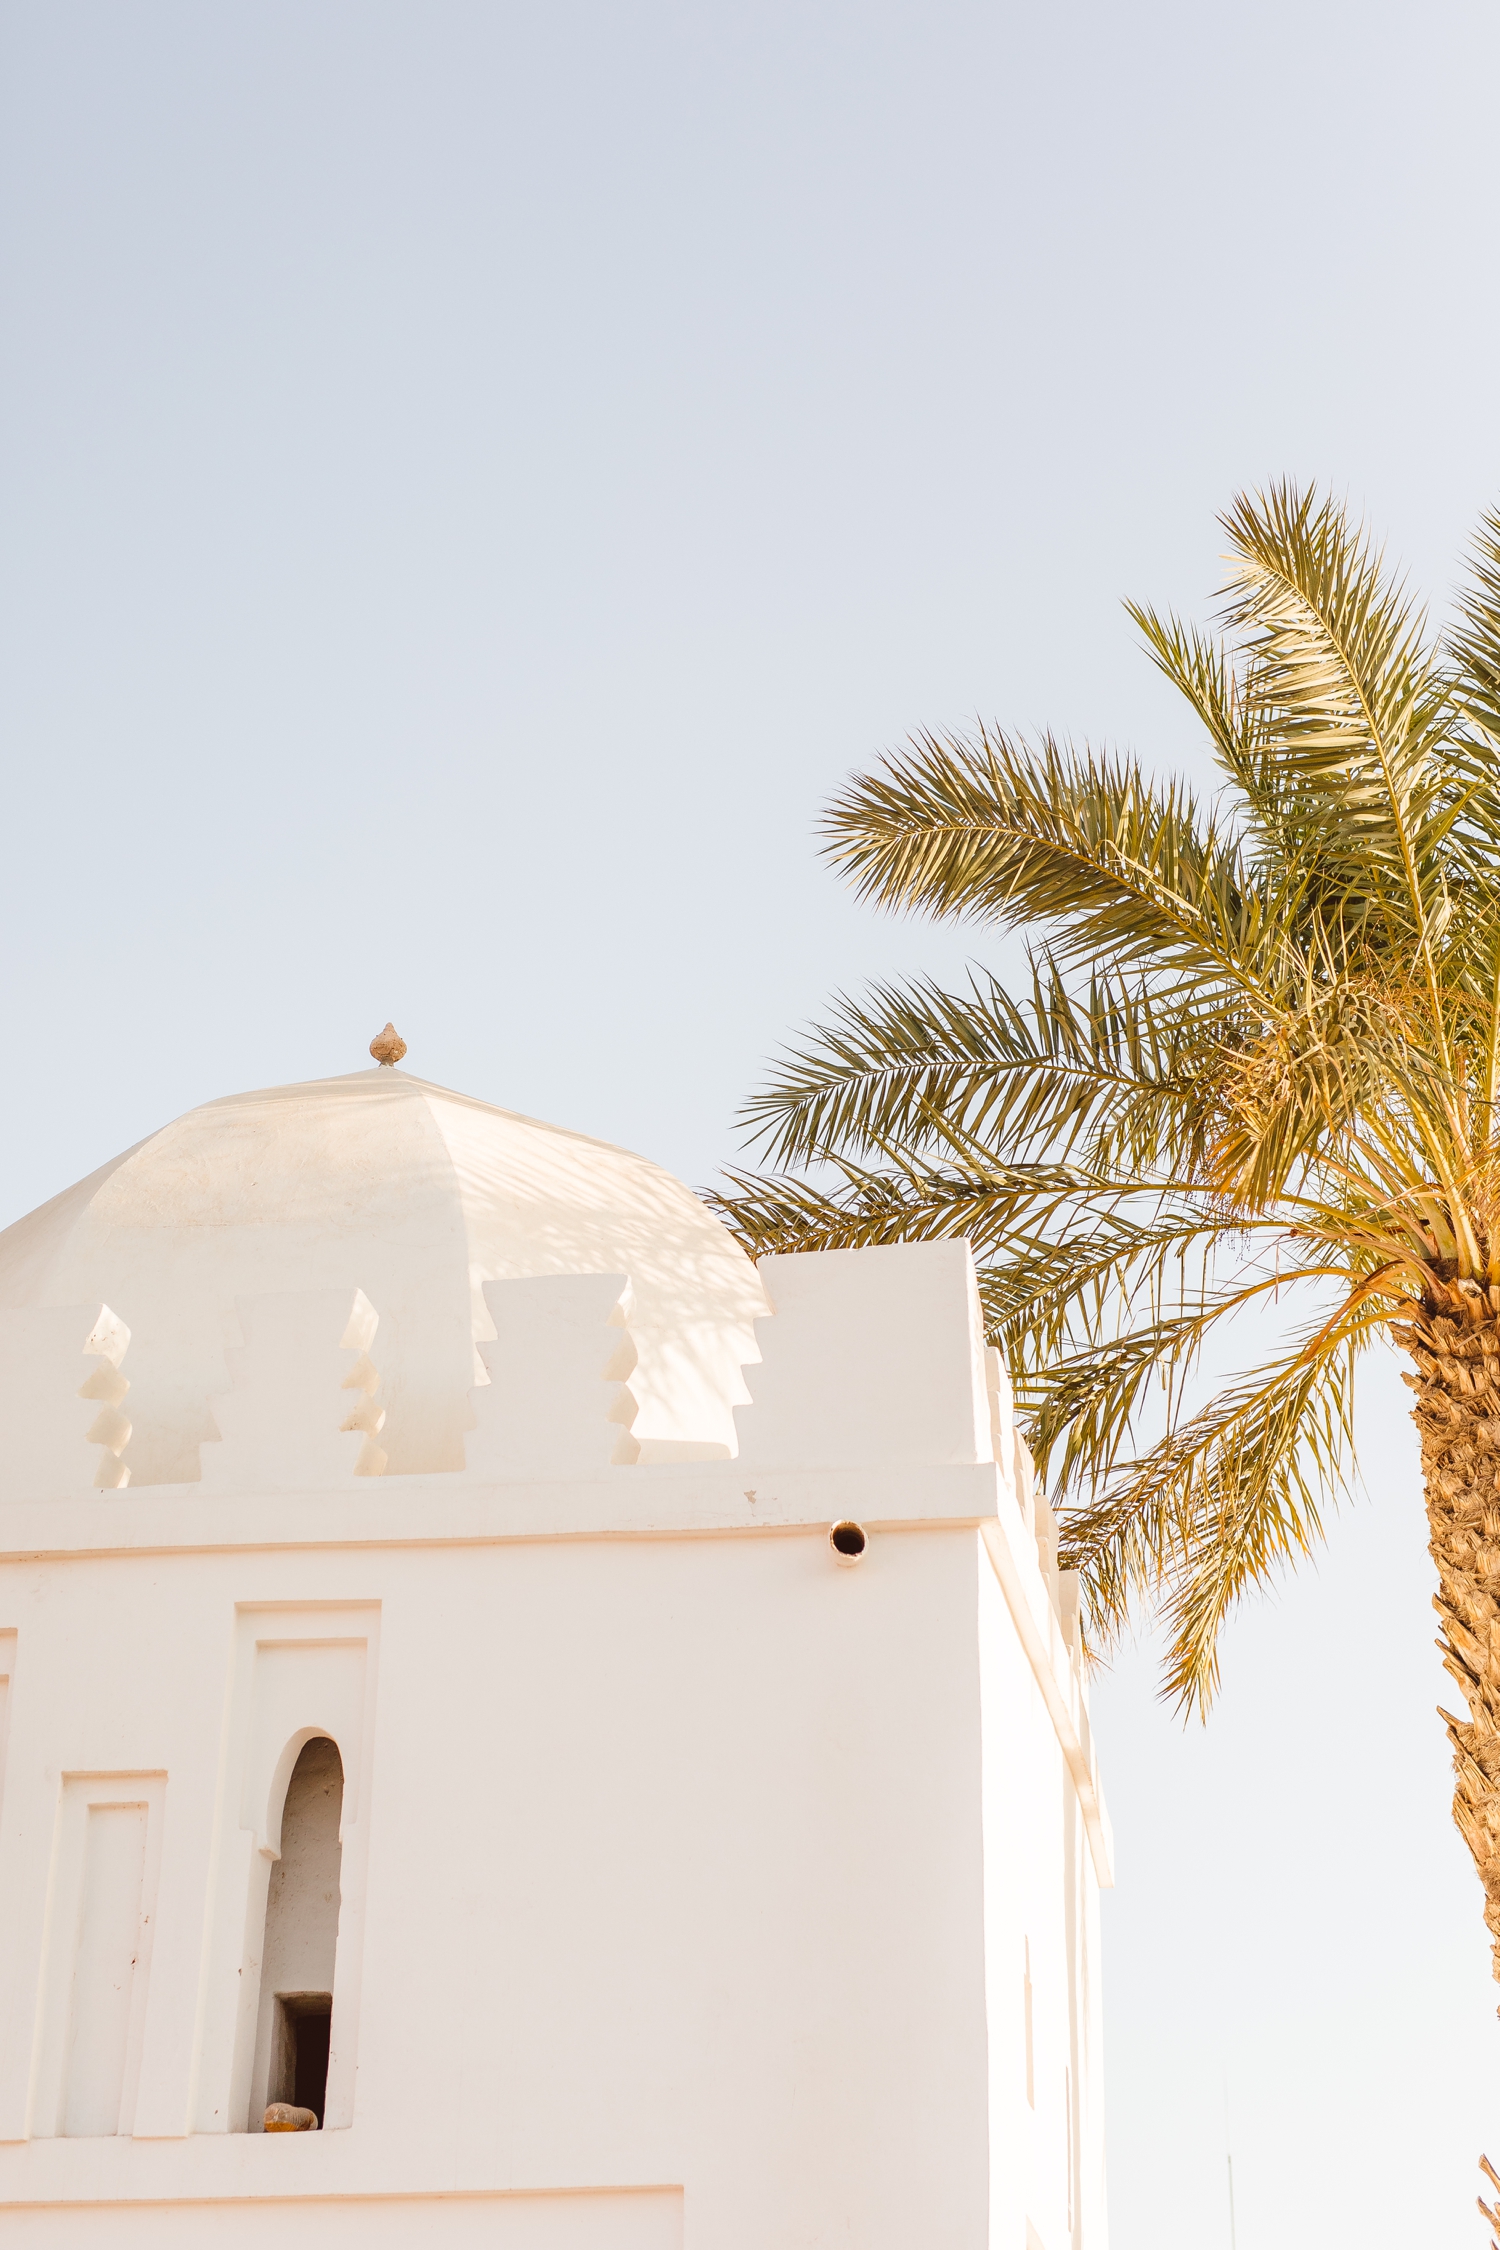 White building with dome on top and palm tree next to it in Marrakesh, Morocco | Brooke Michelle Photography